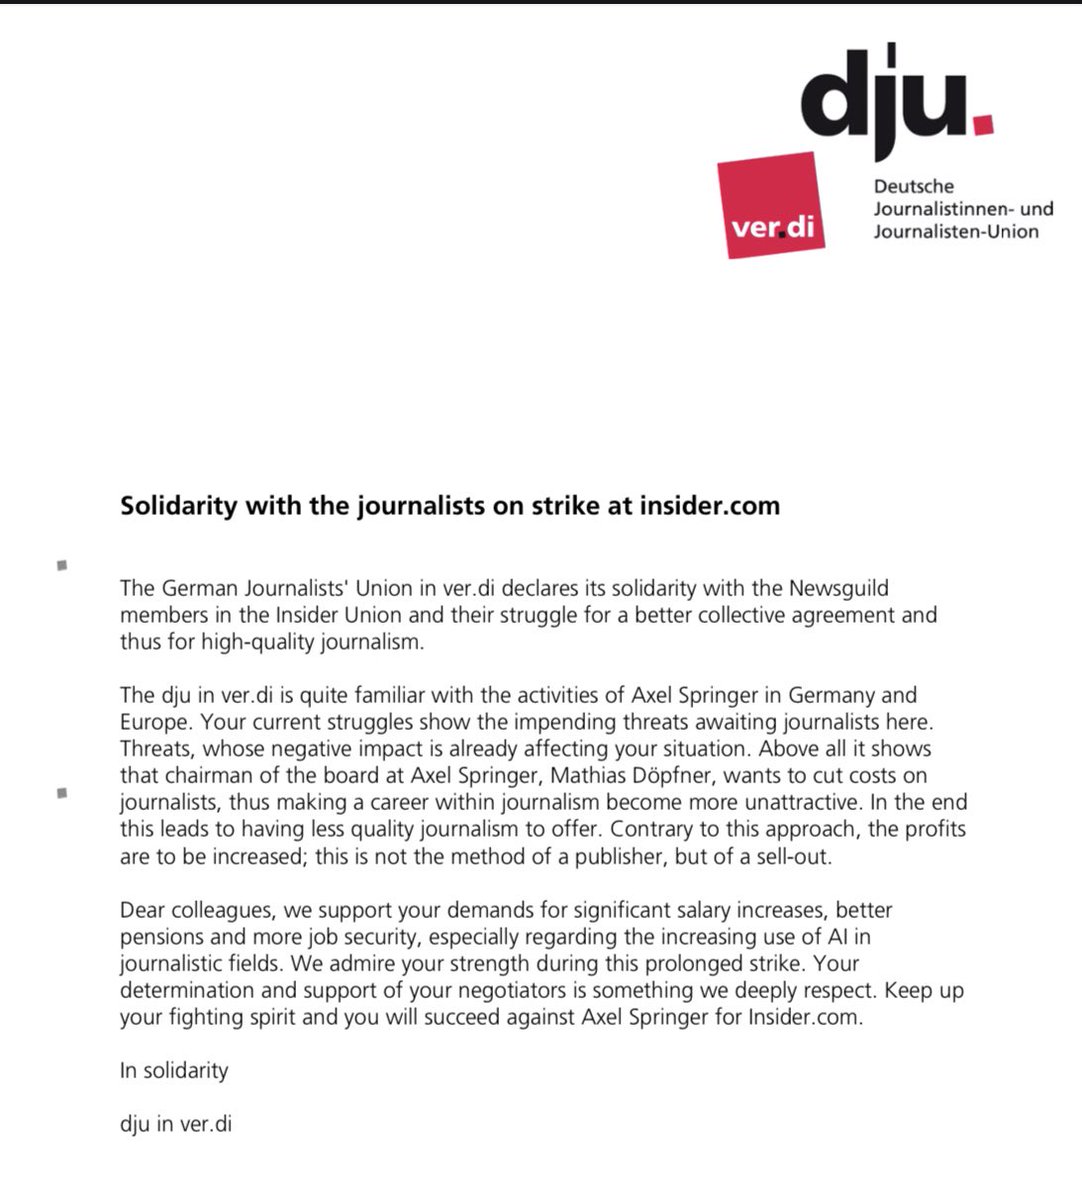 Thank you to the German Journalists’ Union in ver.di @djuverdi for this letter of support for the Insider strike! Our solidarity as journalists spans oceans. ✊💙